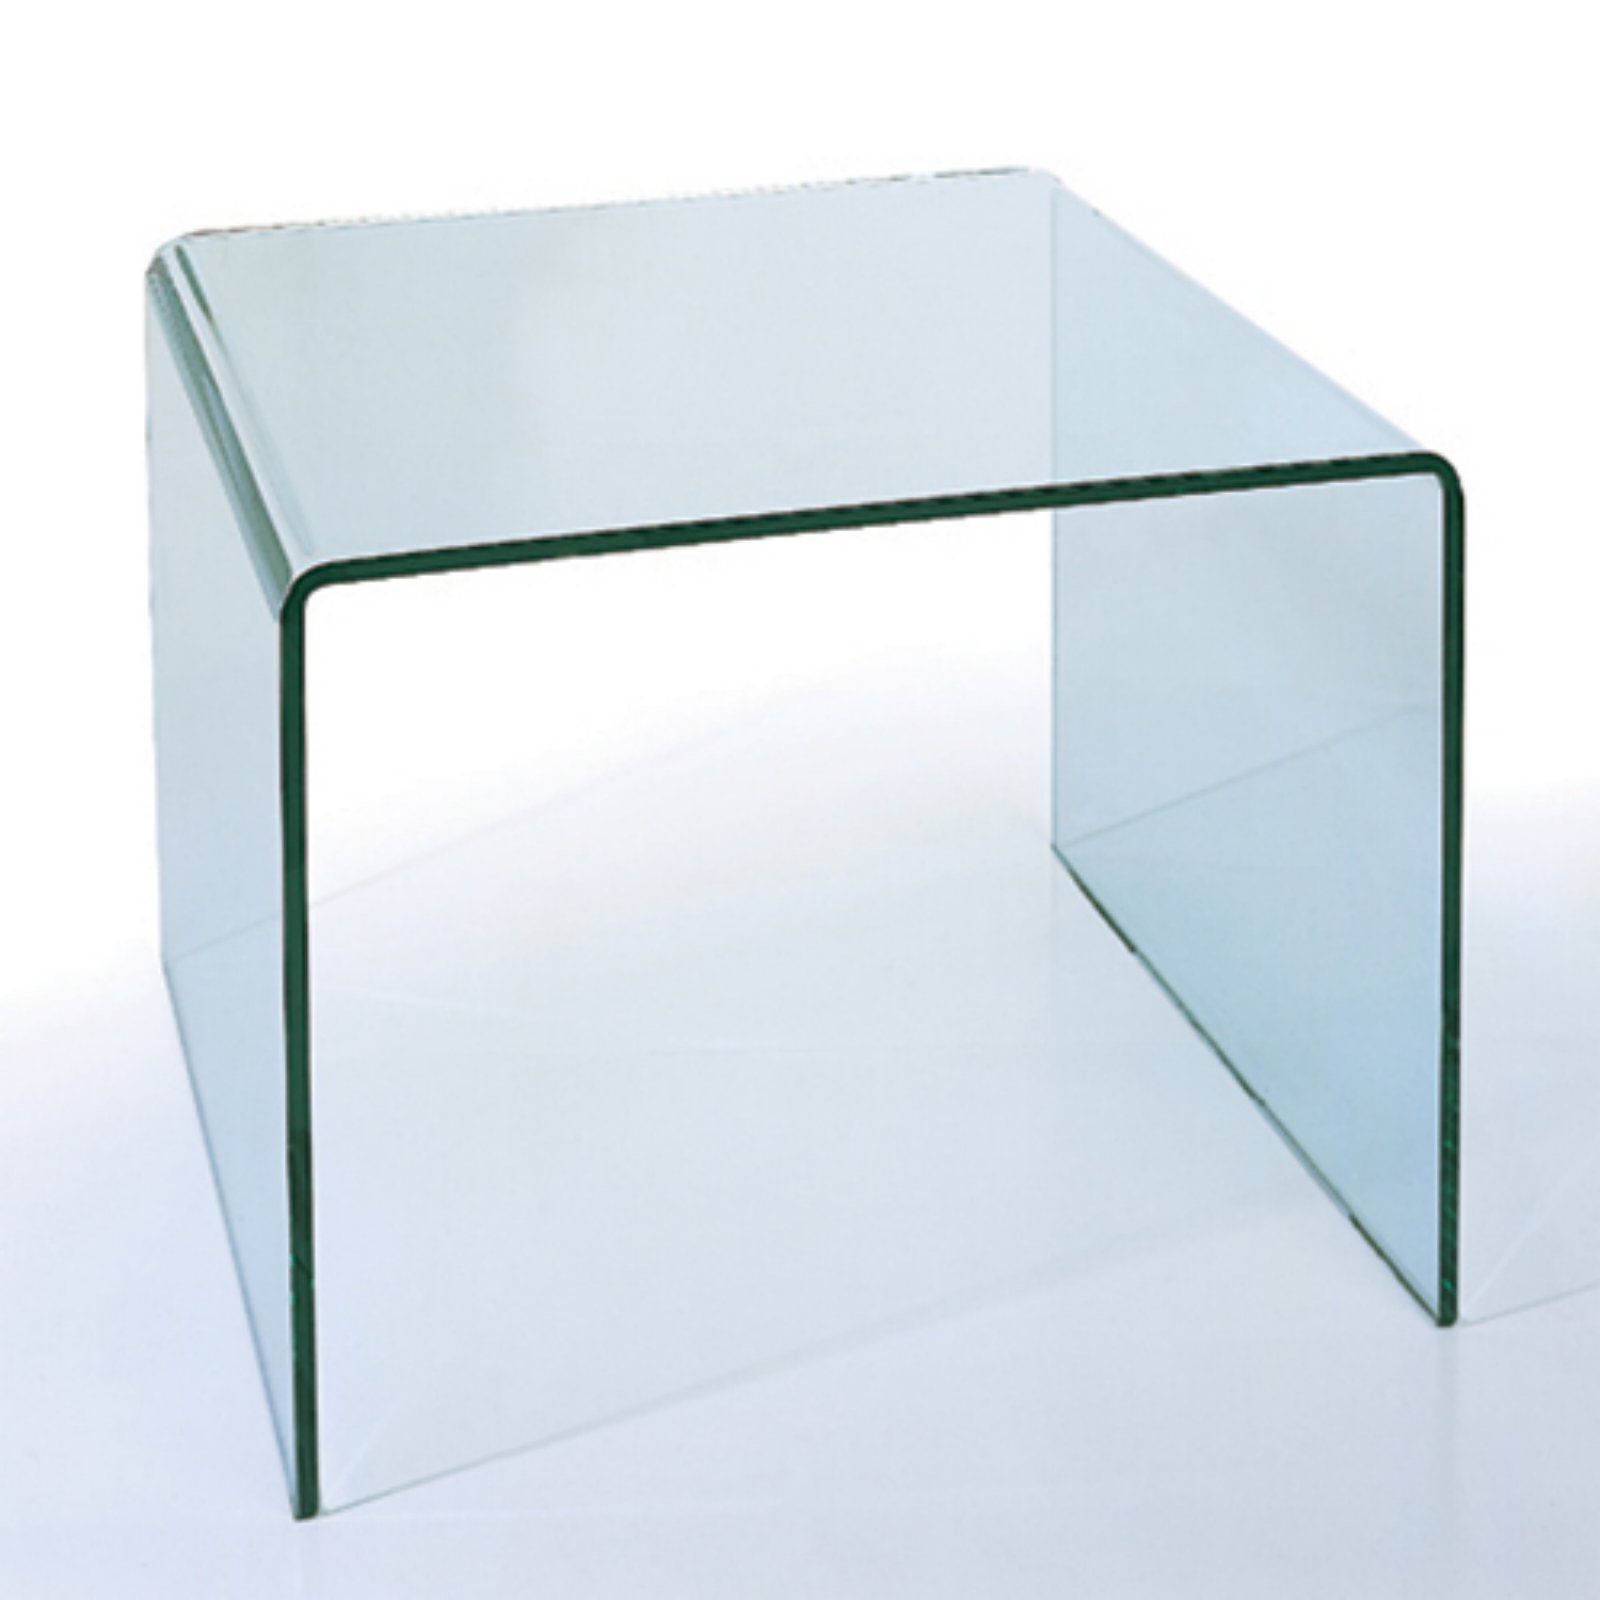 C26a Glass Square End Table (View 4 of 10)